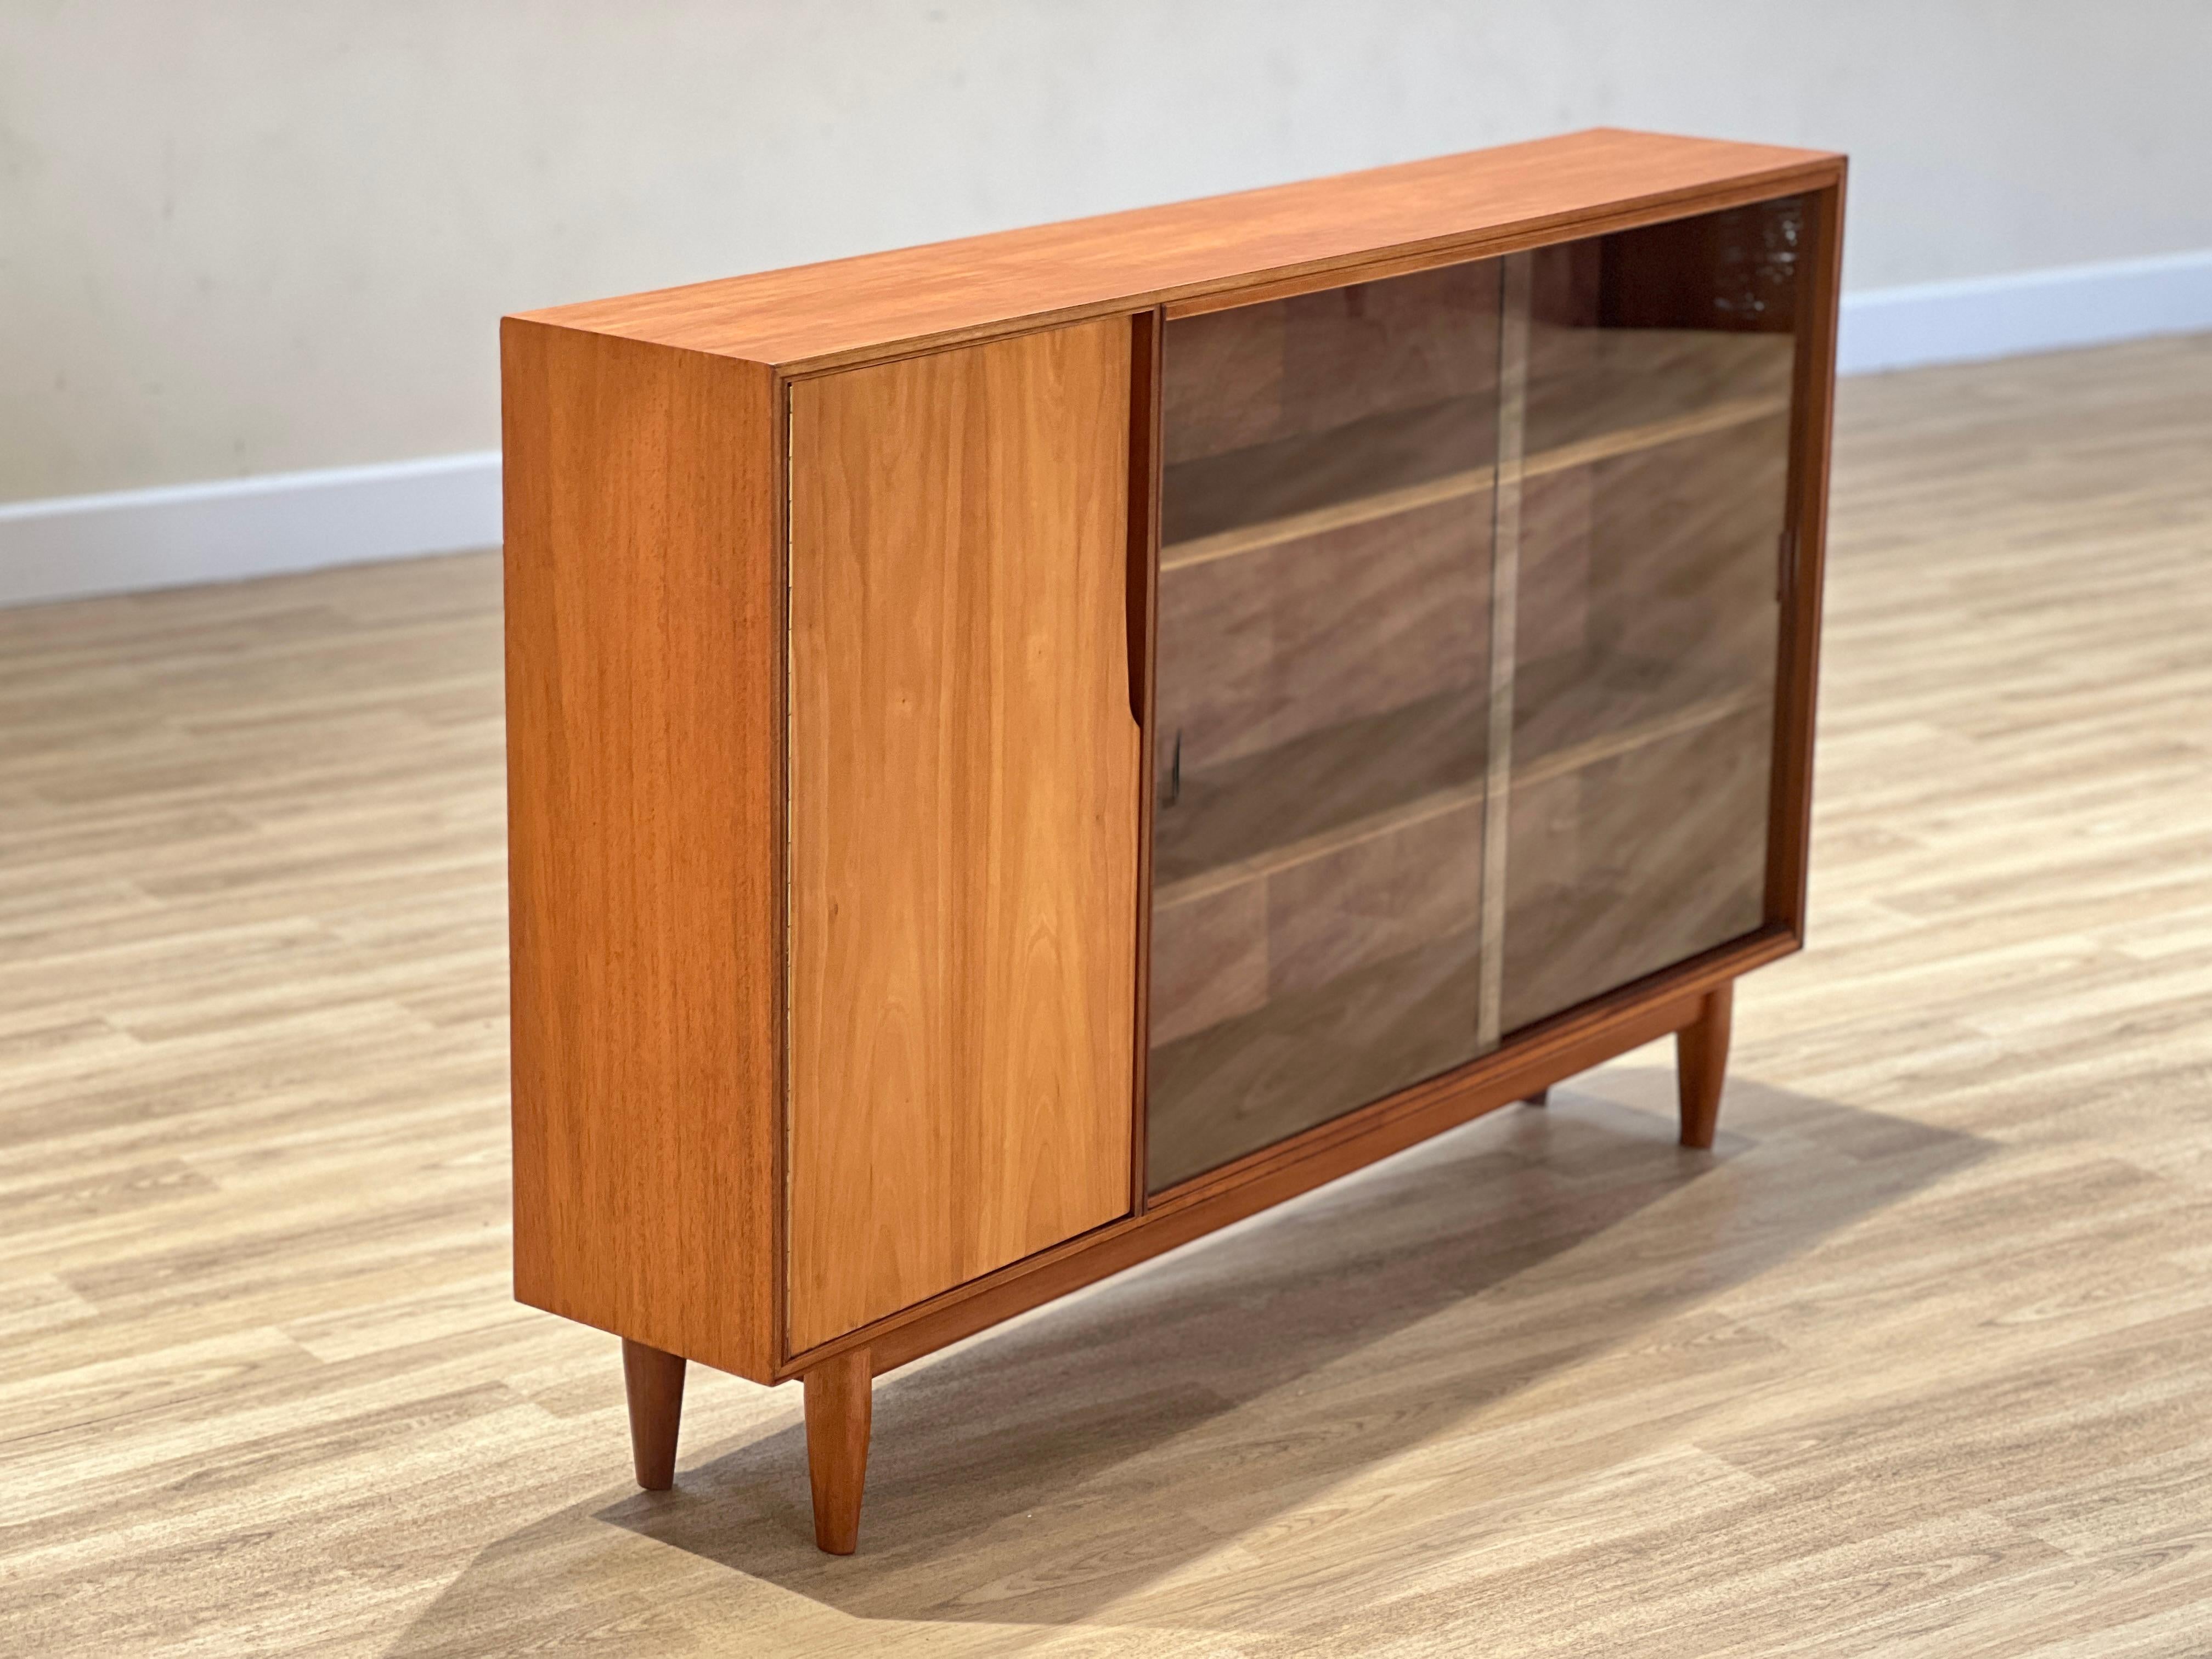 McIntosh teak display cabinet In Excellent Condition For Sale In Buxton, GB